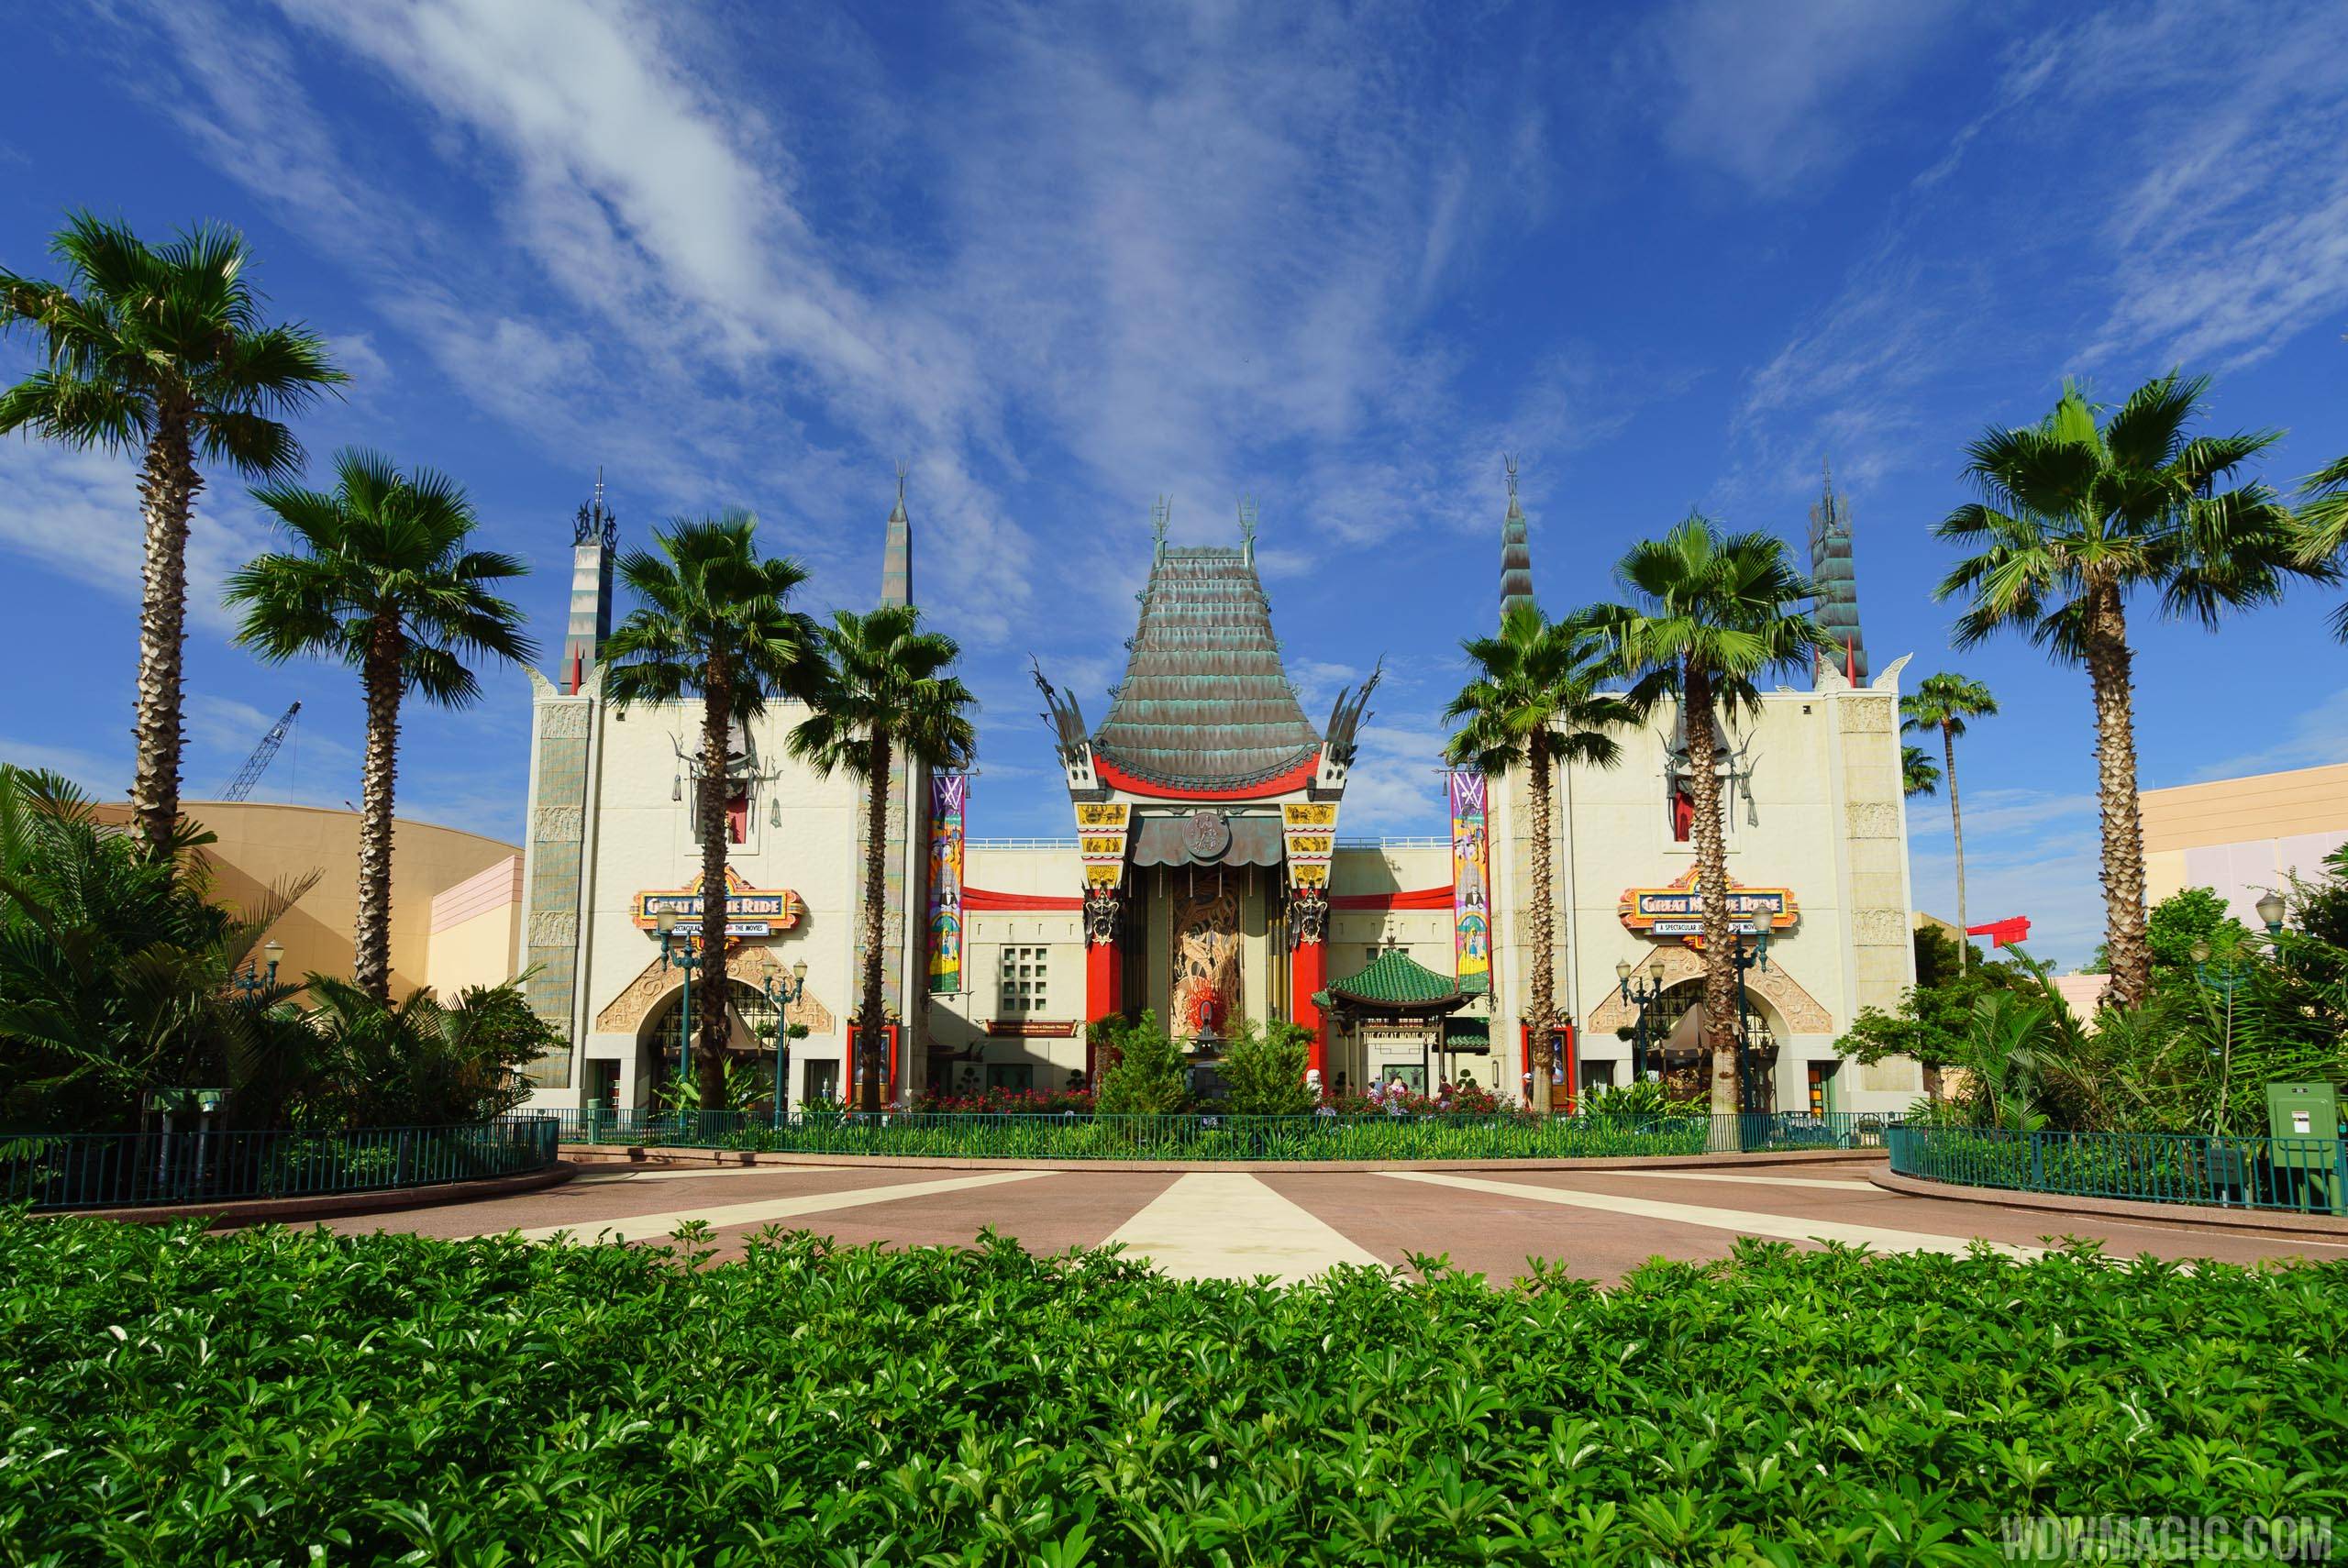 TCM to sign agreement with Disney to include updates to The Great Movie Ride